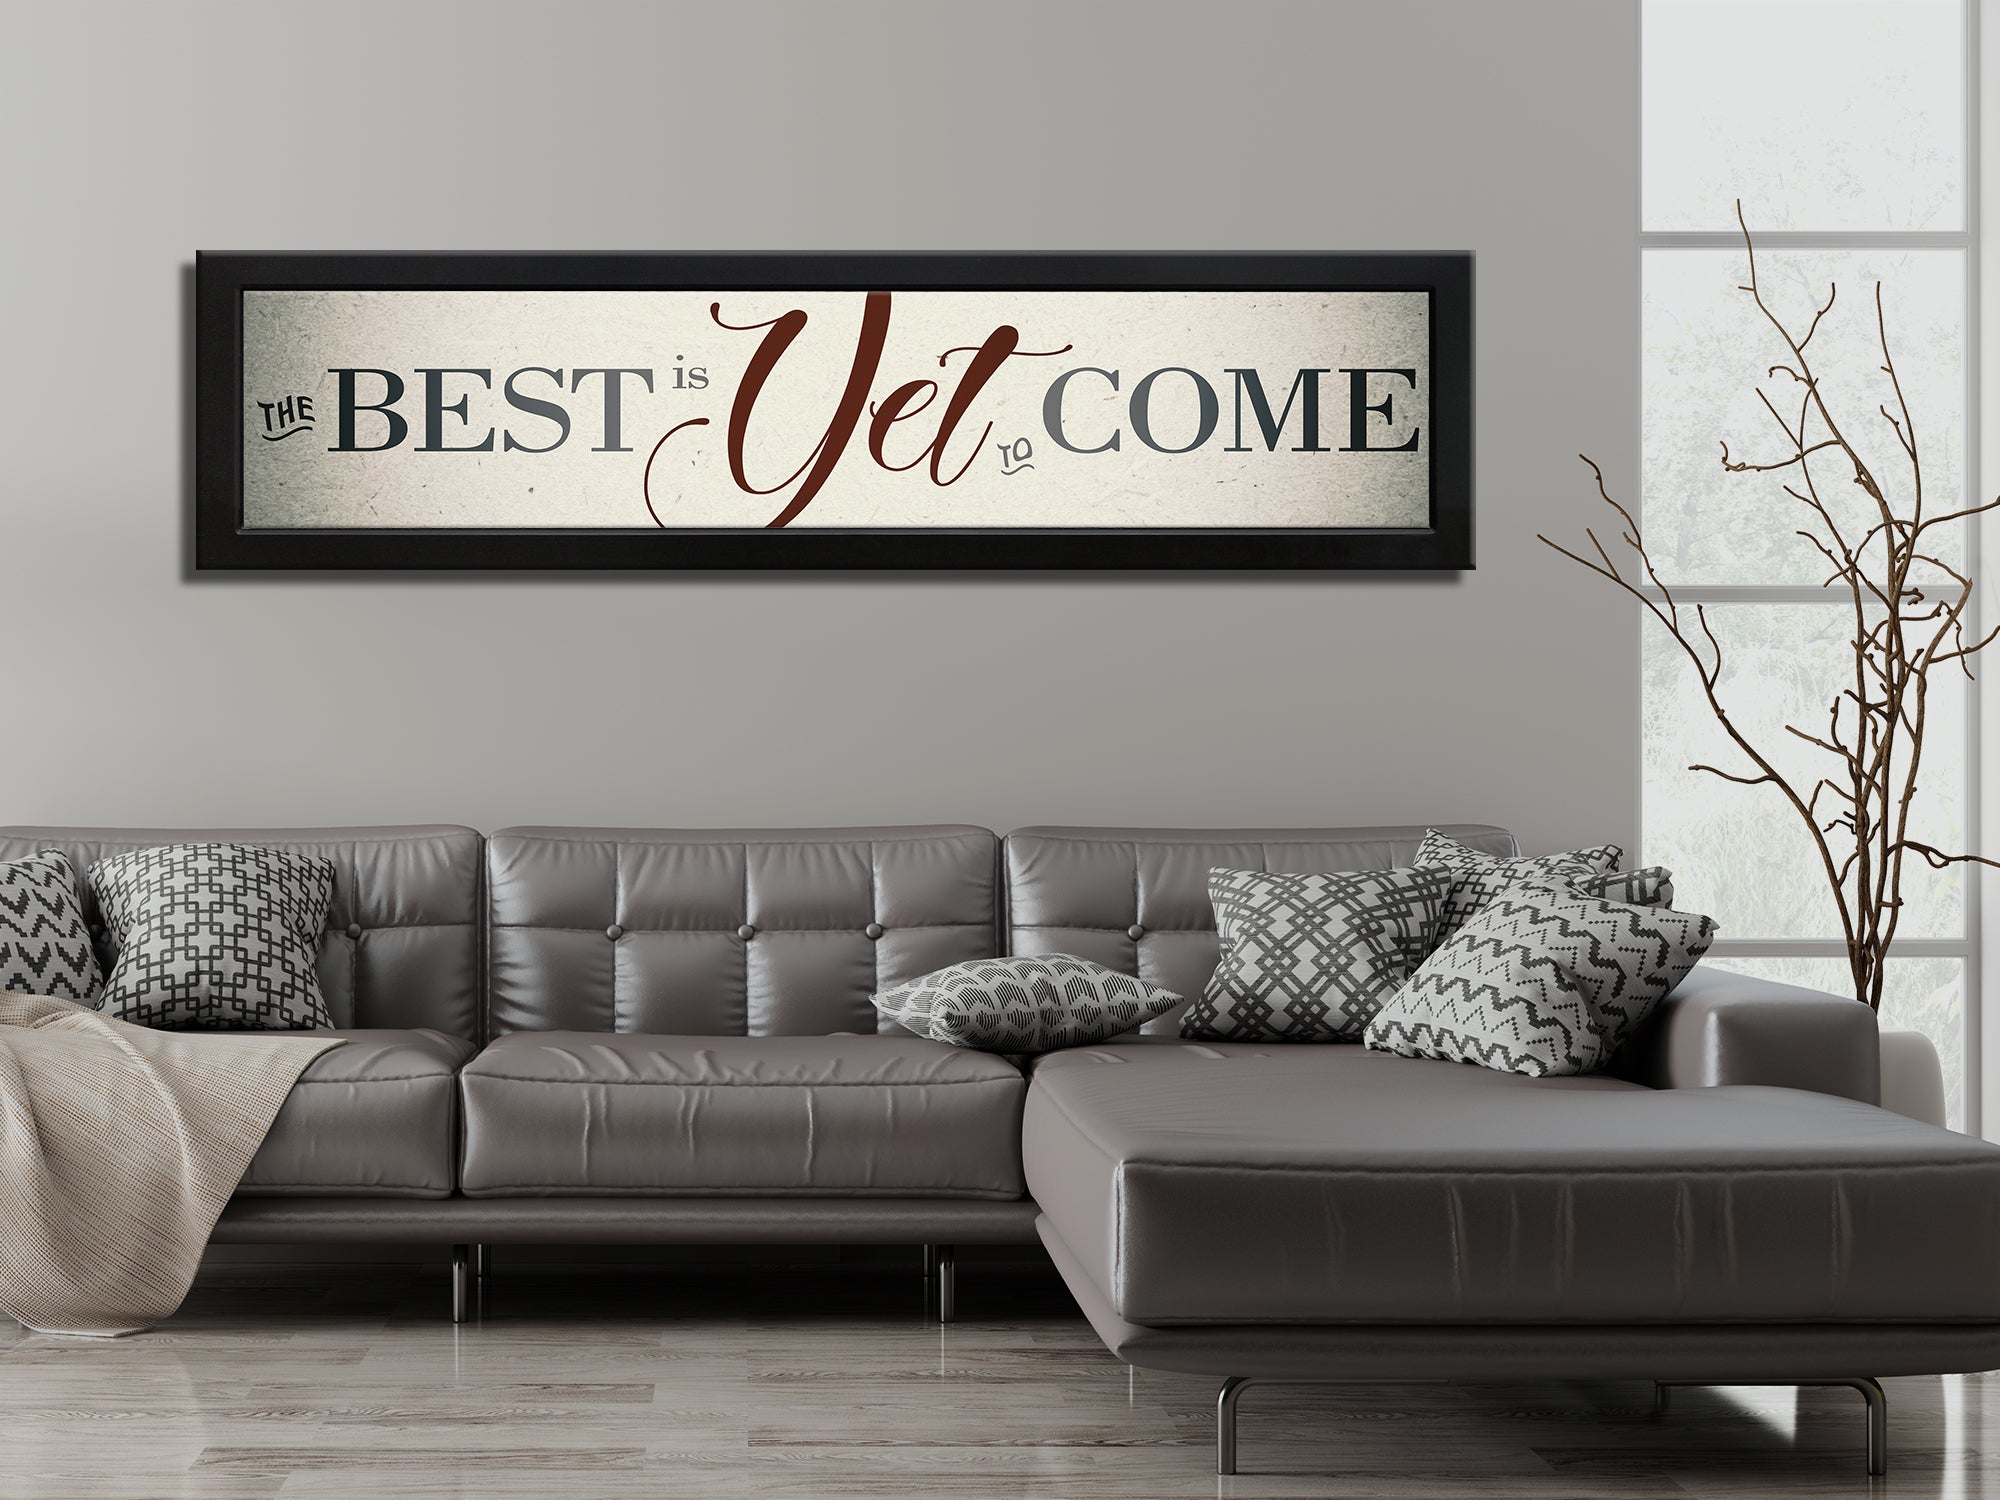 Best Is Yet To Come - Christian - Living Room Canvas Wall Art